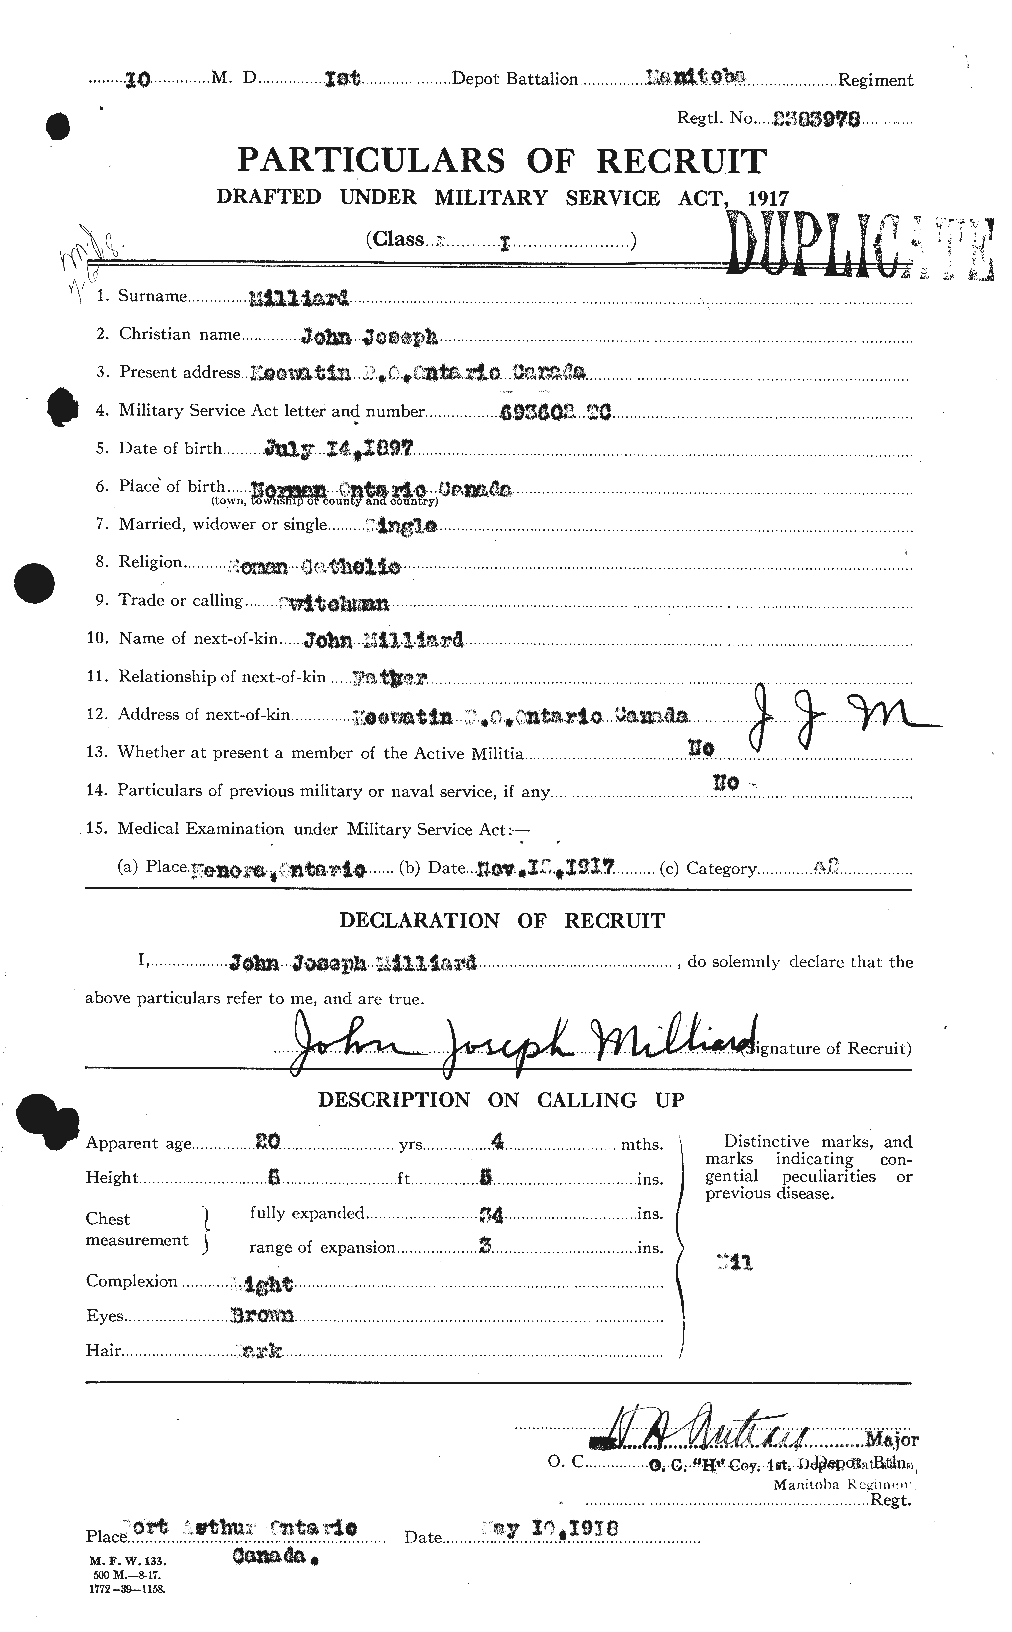 Personnel Records of the First World War - CEF 495026a